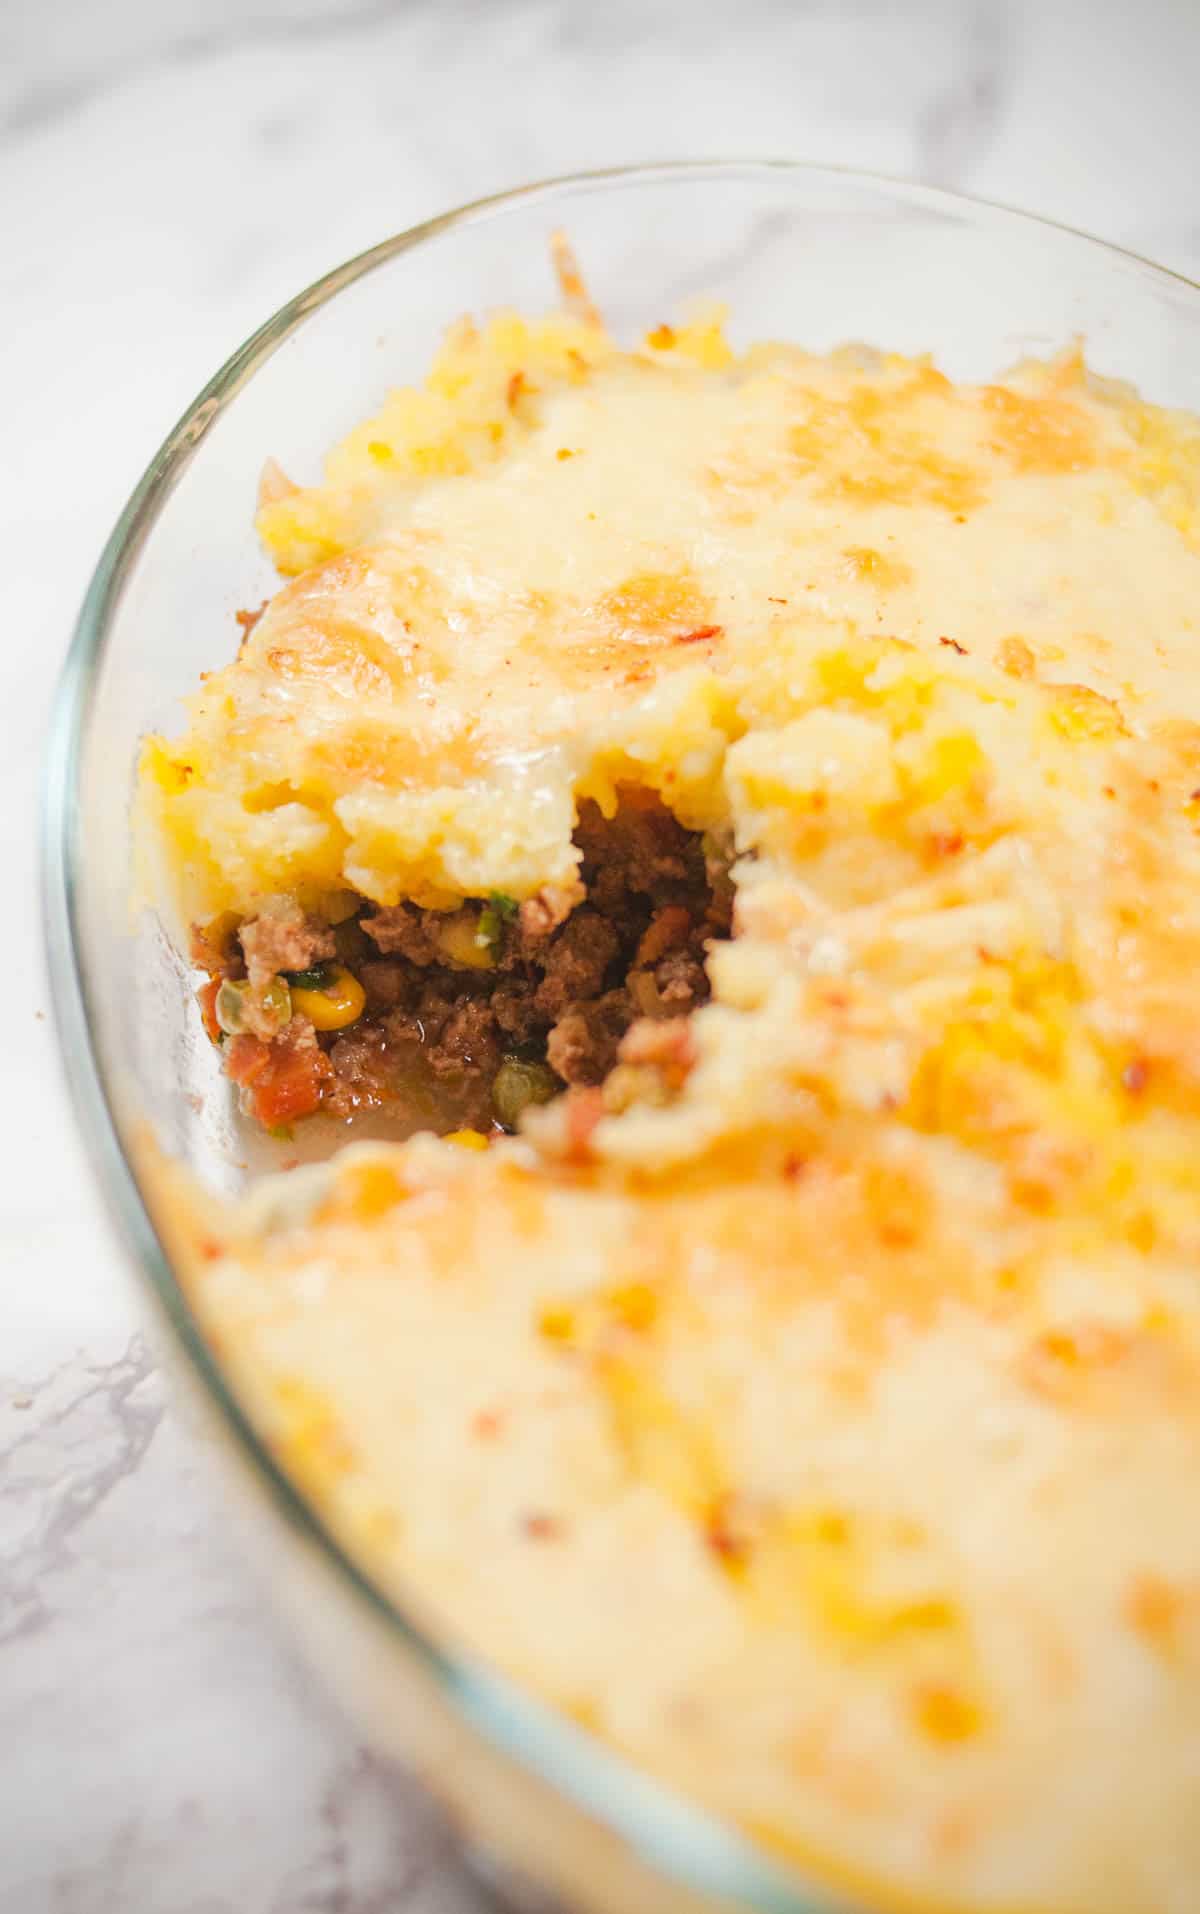 A close up showing filling of baked spicy shepherds pie.